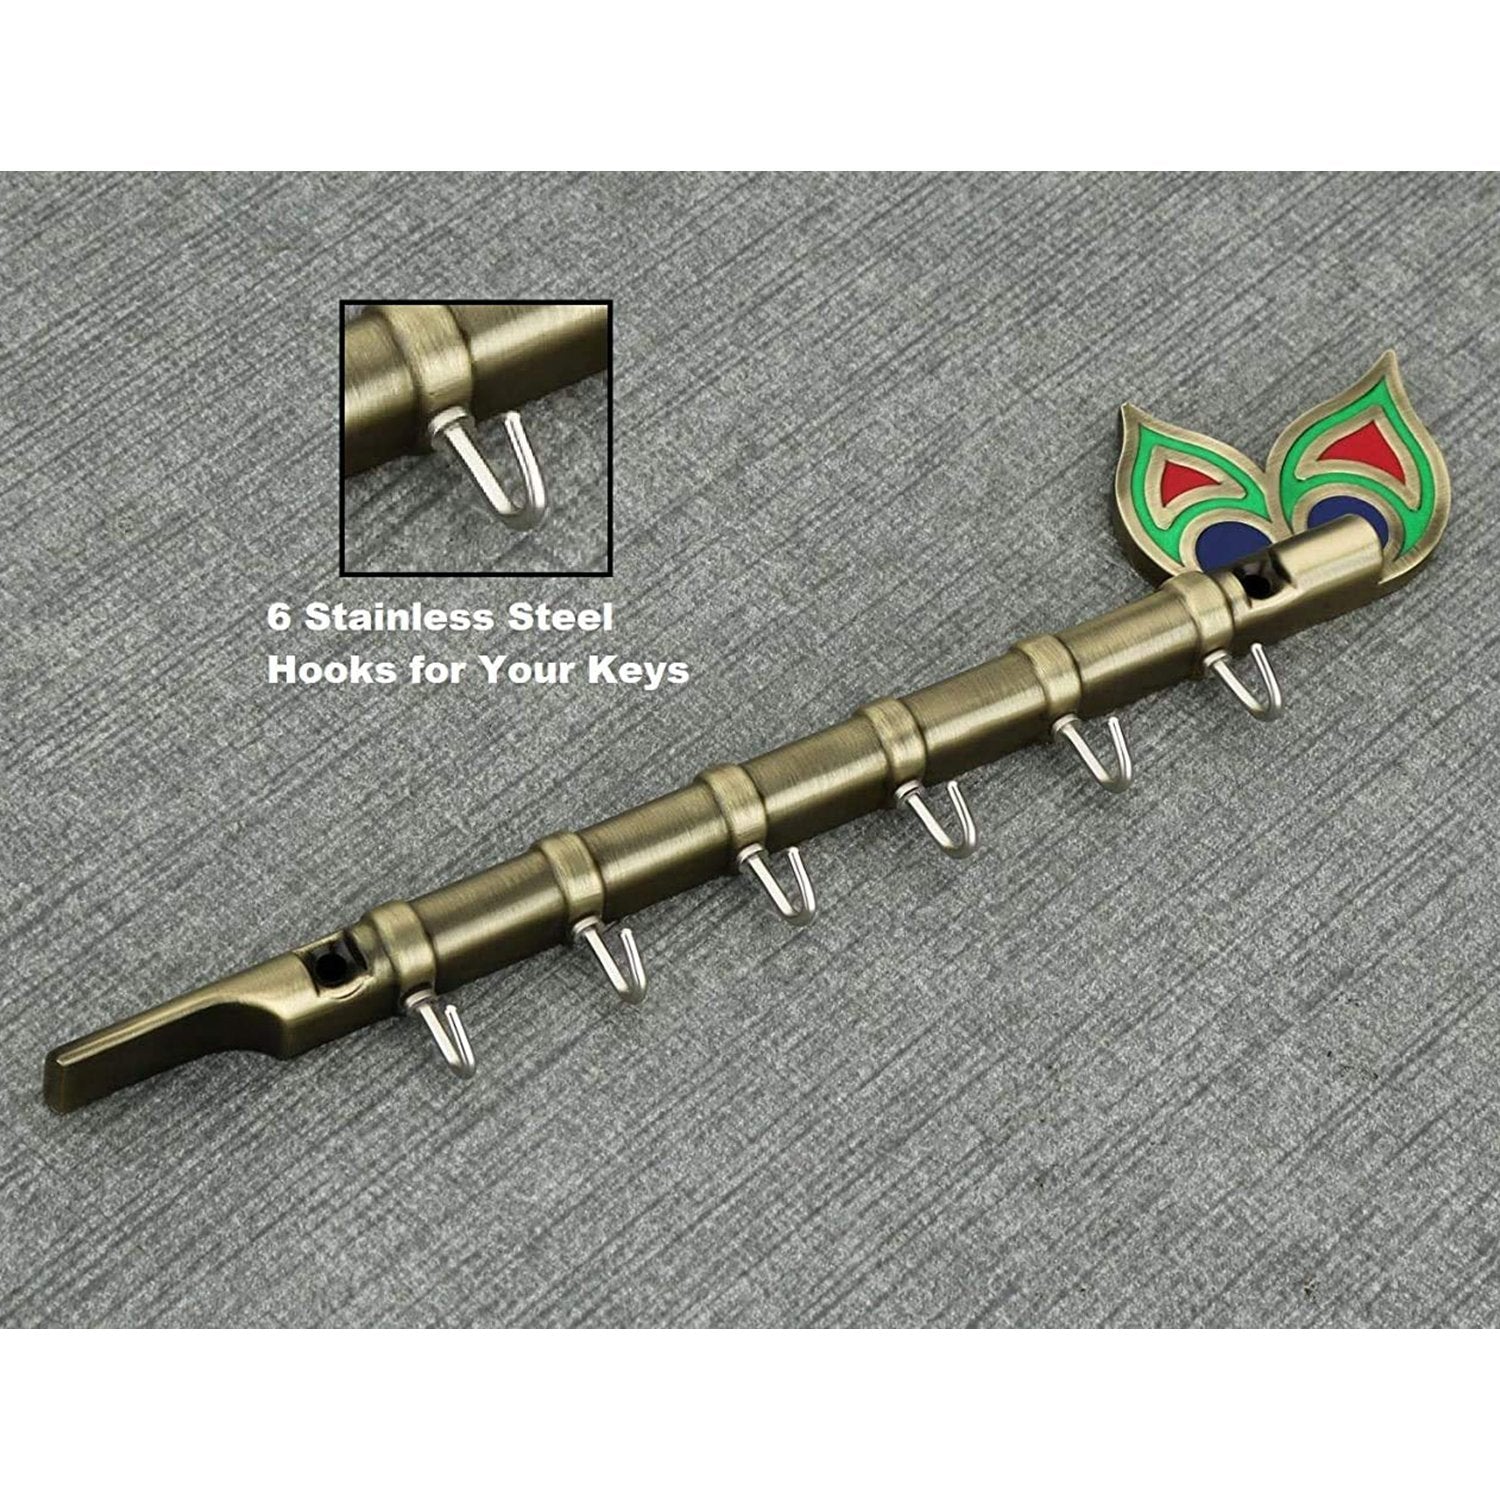 0497 Brass Flute and Peacock Key Holder Wall Hanging - SkyShopy